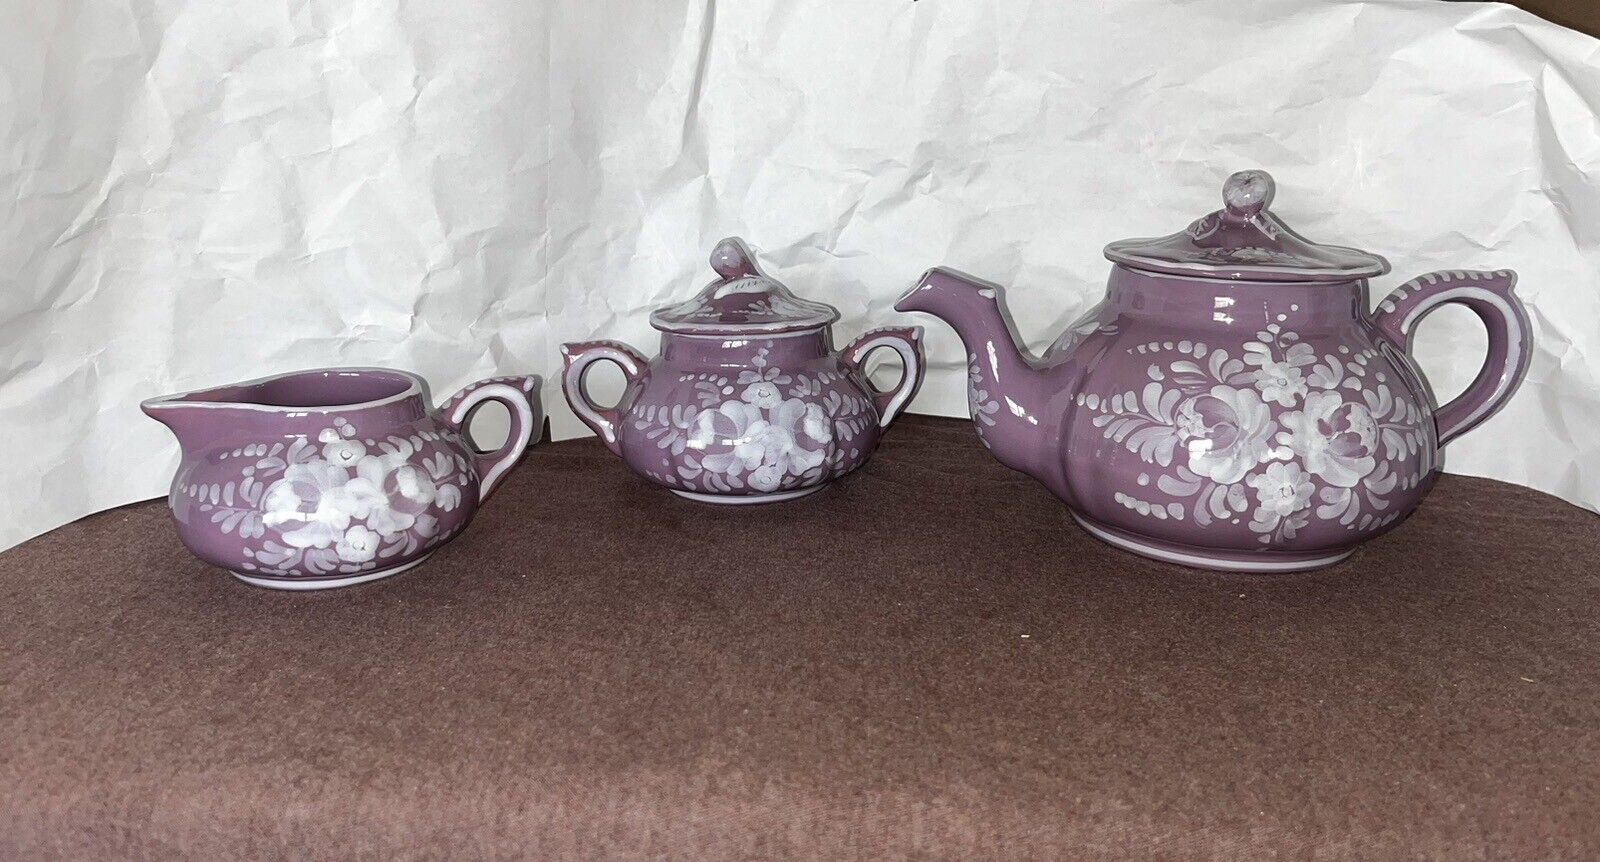 Vintage Purple Hand Painted Kbny Italy Ceramic Teapot with Sugar and Creamer Set